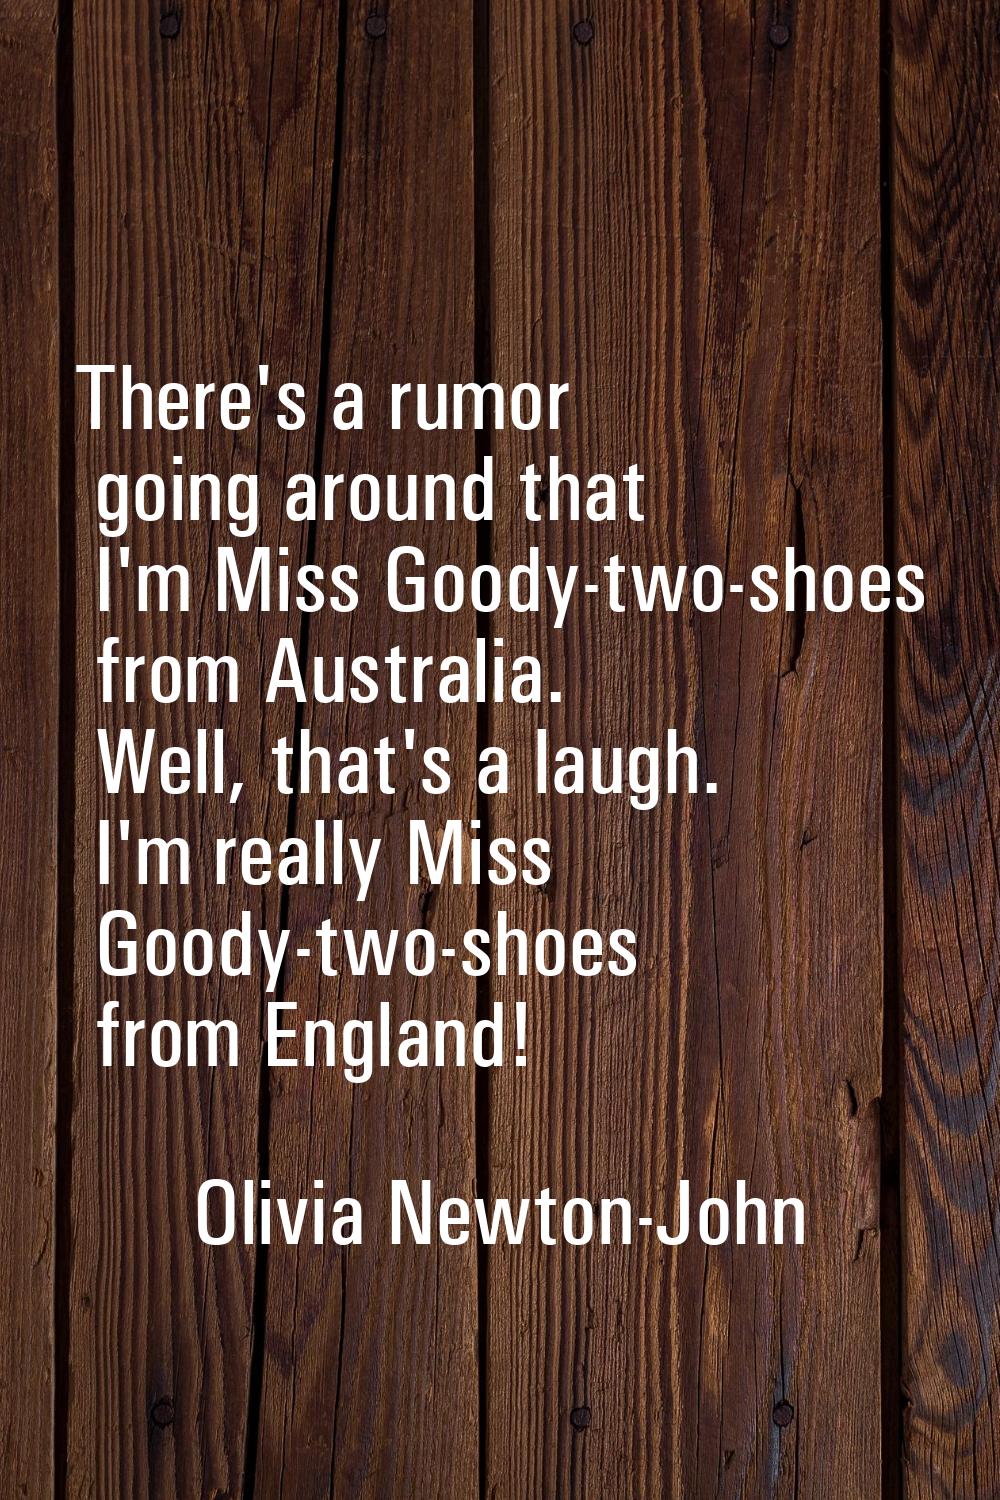 There's a rumor going around that I'm Miss Goody-two-shoes from Australia. Well, that's a laugh. I'